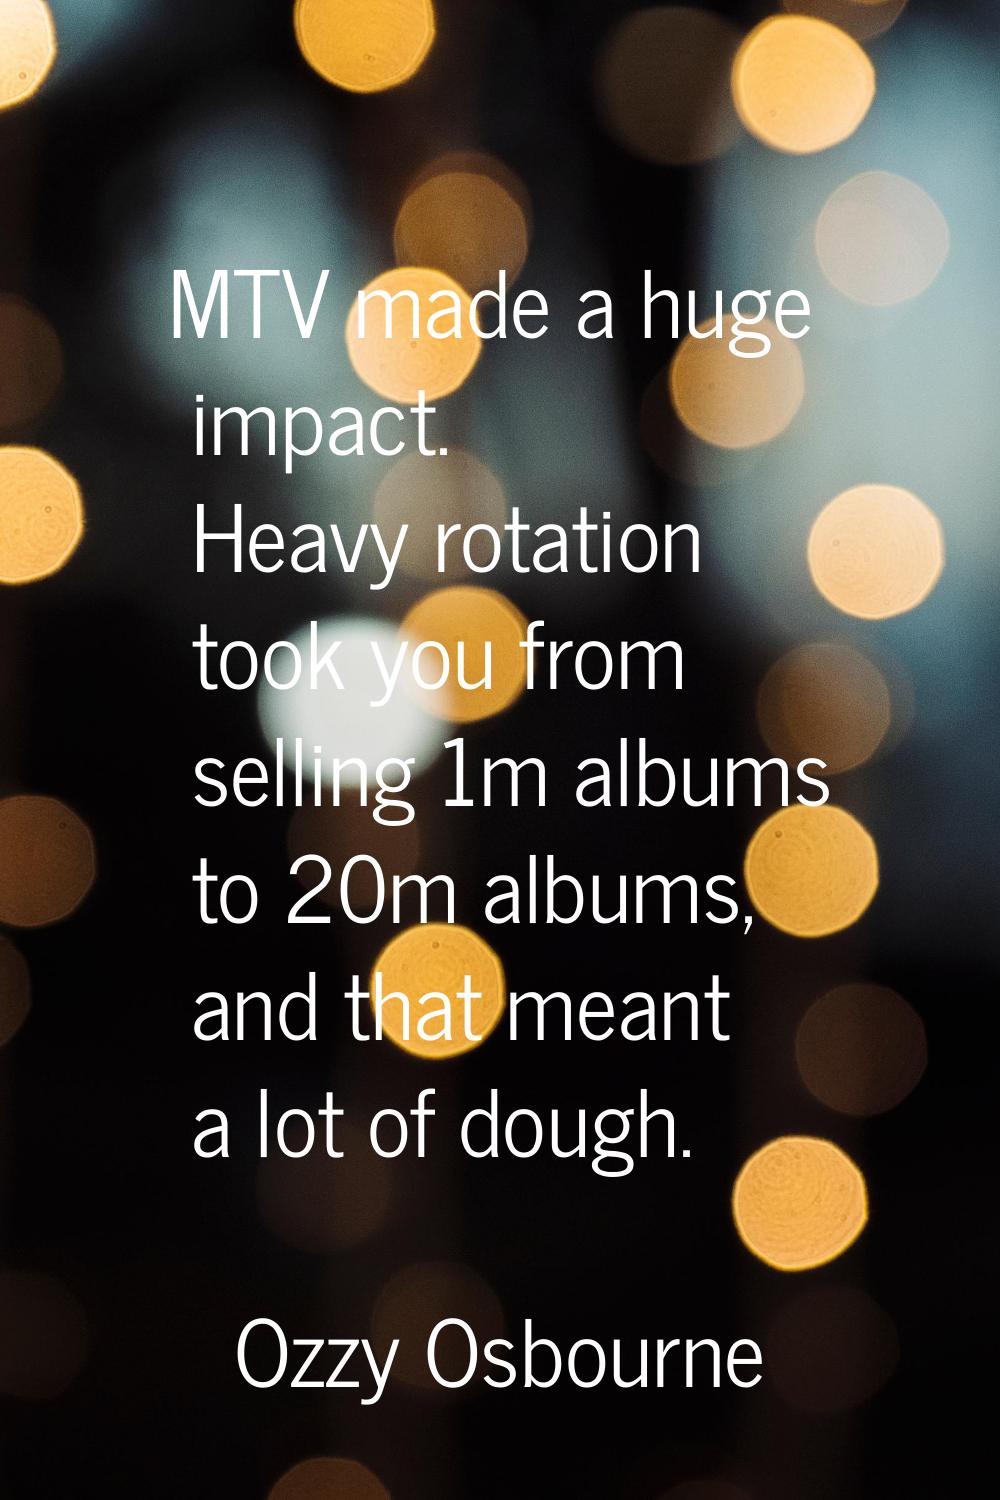 MTV made a huge impact. Heavy rotation took you from selling 1m albums to 20m albums, and that mean